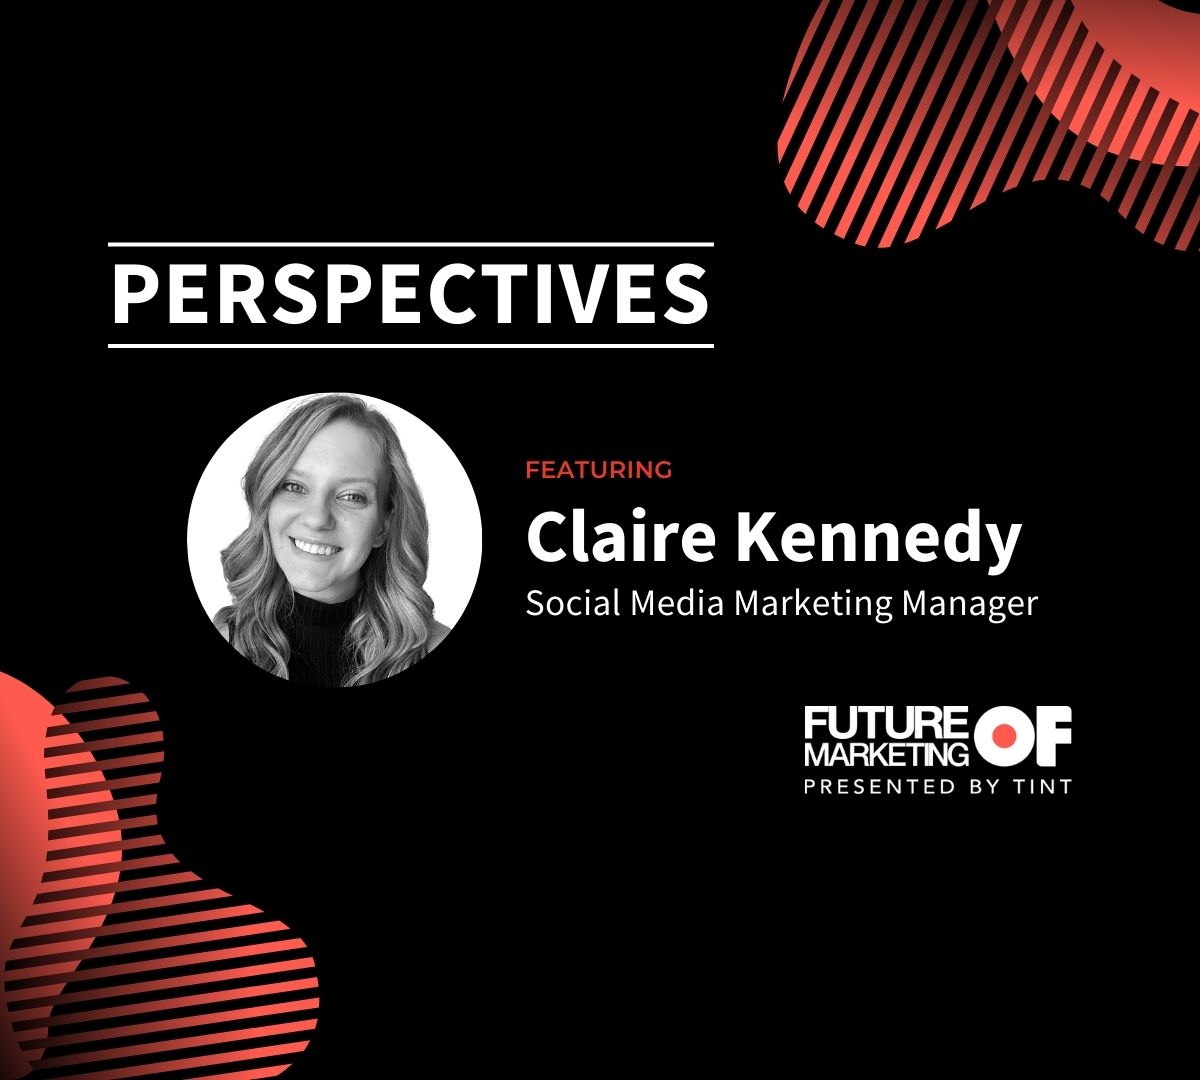 Perspectives: Claire Kennedy, Social Media Marketing Manager